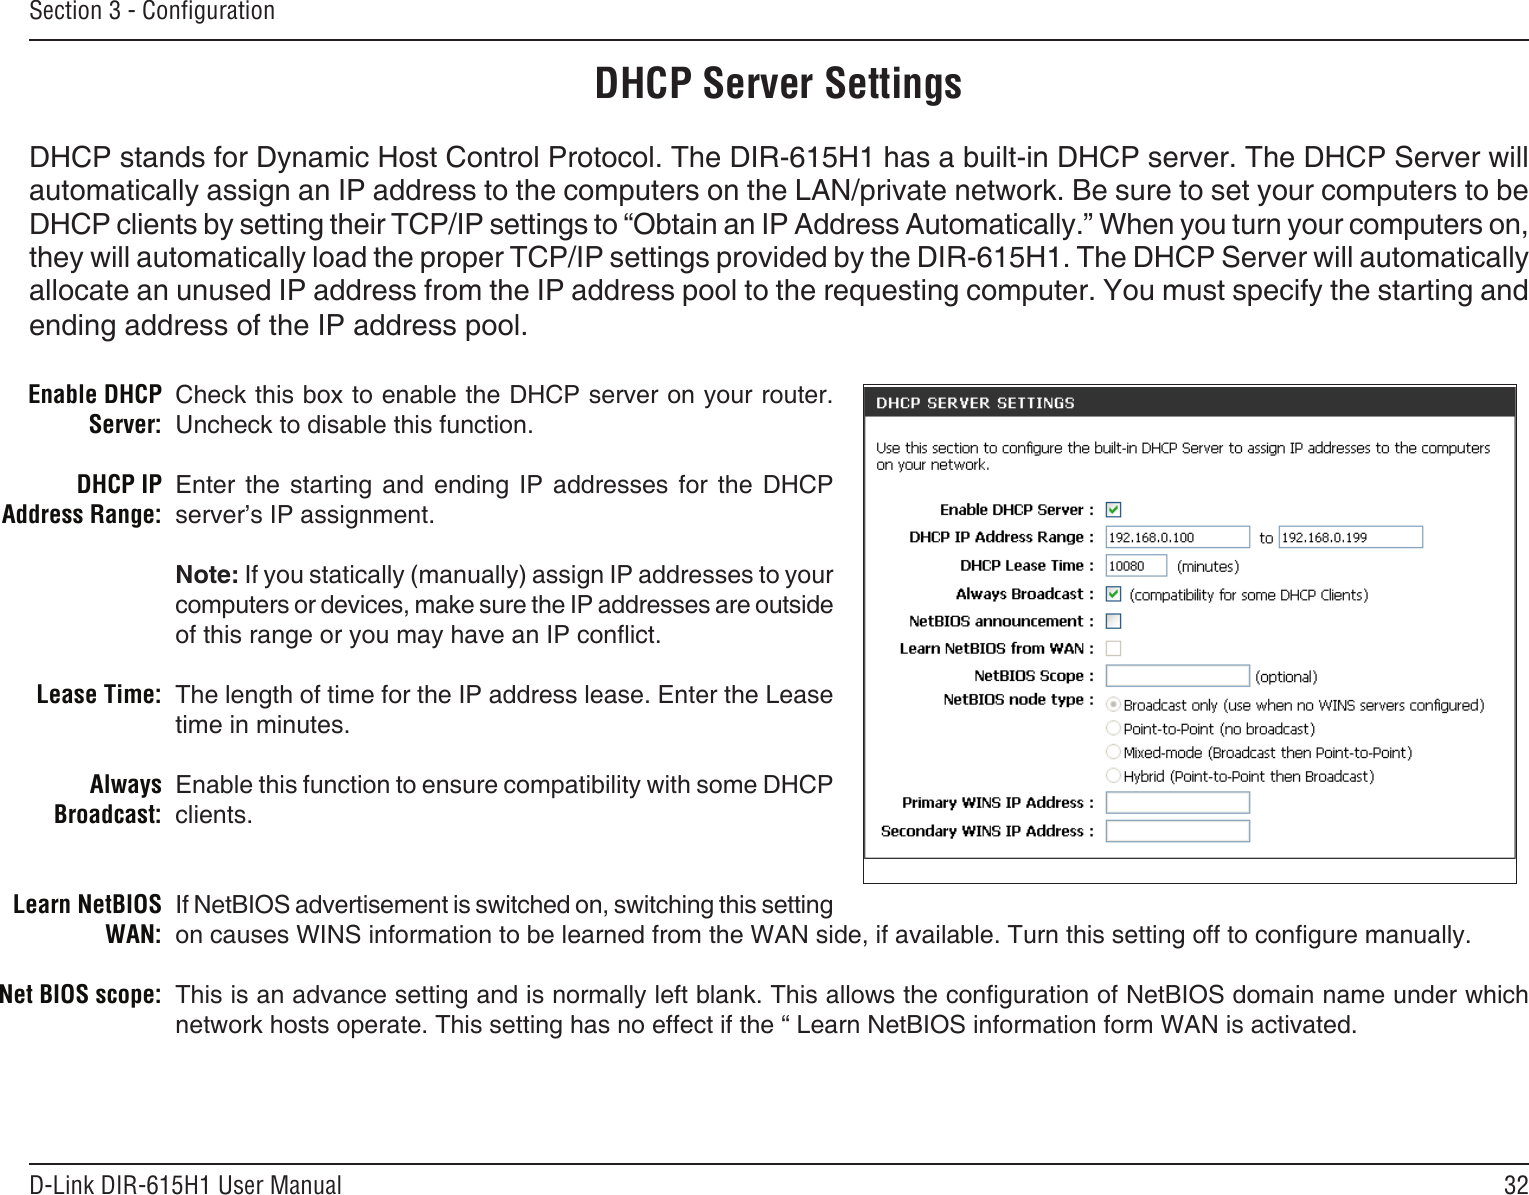 32D-Link DIR-615H1 User ManualSection 3 - CongurationCheck this box to enable the DHCP server on your router. Uncheck to disable this function.Enter  the  starting  and  ending  IP  addresses  for  the  DHCP server’s IP assignment.Note: If you statically (manually) assign IP addresses to your computers or devices, make sure the IP addresses are outside of this range or you may have an IP conict. The length of time for the IP address lease. Enter the Lease time in minutes.Enable this function to ensure compatibility with some DHCP clients.If NetBIOS advertisement is switched on, switching this setting on causes WINS information to be learned from the WAN side, if available. Turn this setting off to congure manually. This is an advance setting and is normally left blank. This allows the conguration of NetBIOS domain name under which network hosts operate. This setting has no effect if the “ Learn NetBIOS information form WAN is activated.  Enable DHCP Server:DHCP IP Address Range:Lease Time:Always Broadcast:Learn NetBIOS WAN:Net BIOS scope: DHCP Server SettingsDHCP stands for Dynamic Host Control Protocol. The DIR-615H1 has a built-in DHCP server. The DHCP Server will automatically assign an IP address to the computers on the LAN/private network. Be sure to set your computers to be DHCP clients by setting their TCP/IP settings to “Obtain an IP Address Automatically.” When you turn your computers on, they will automatically load the proper TCP/IP settings provided by the DIR-615H1. The DHCP Server will automatically allocate an unused IP address from the IP address pool to the requesting computer. You must specify the starting and ending address of the IP address pool.